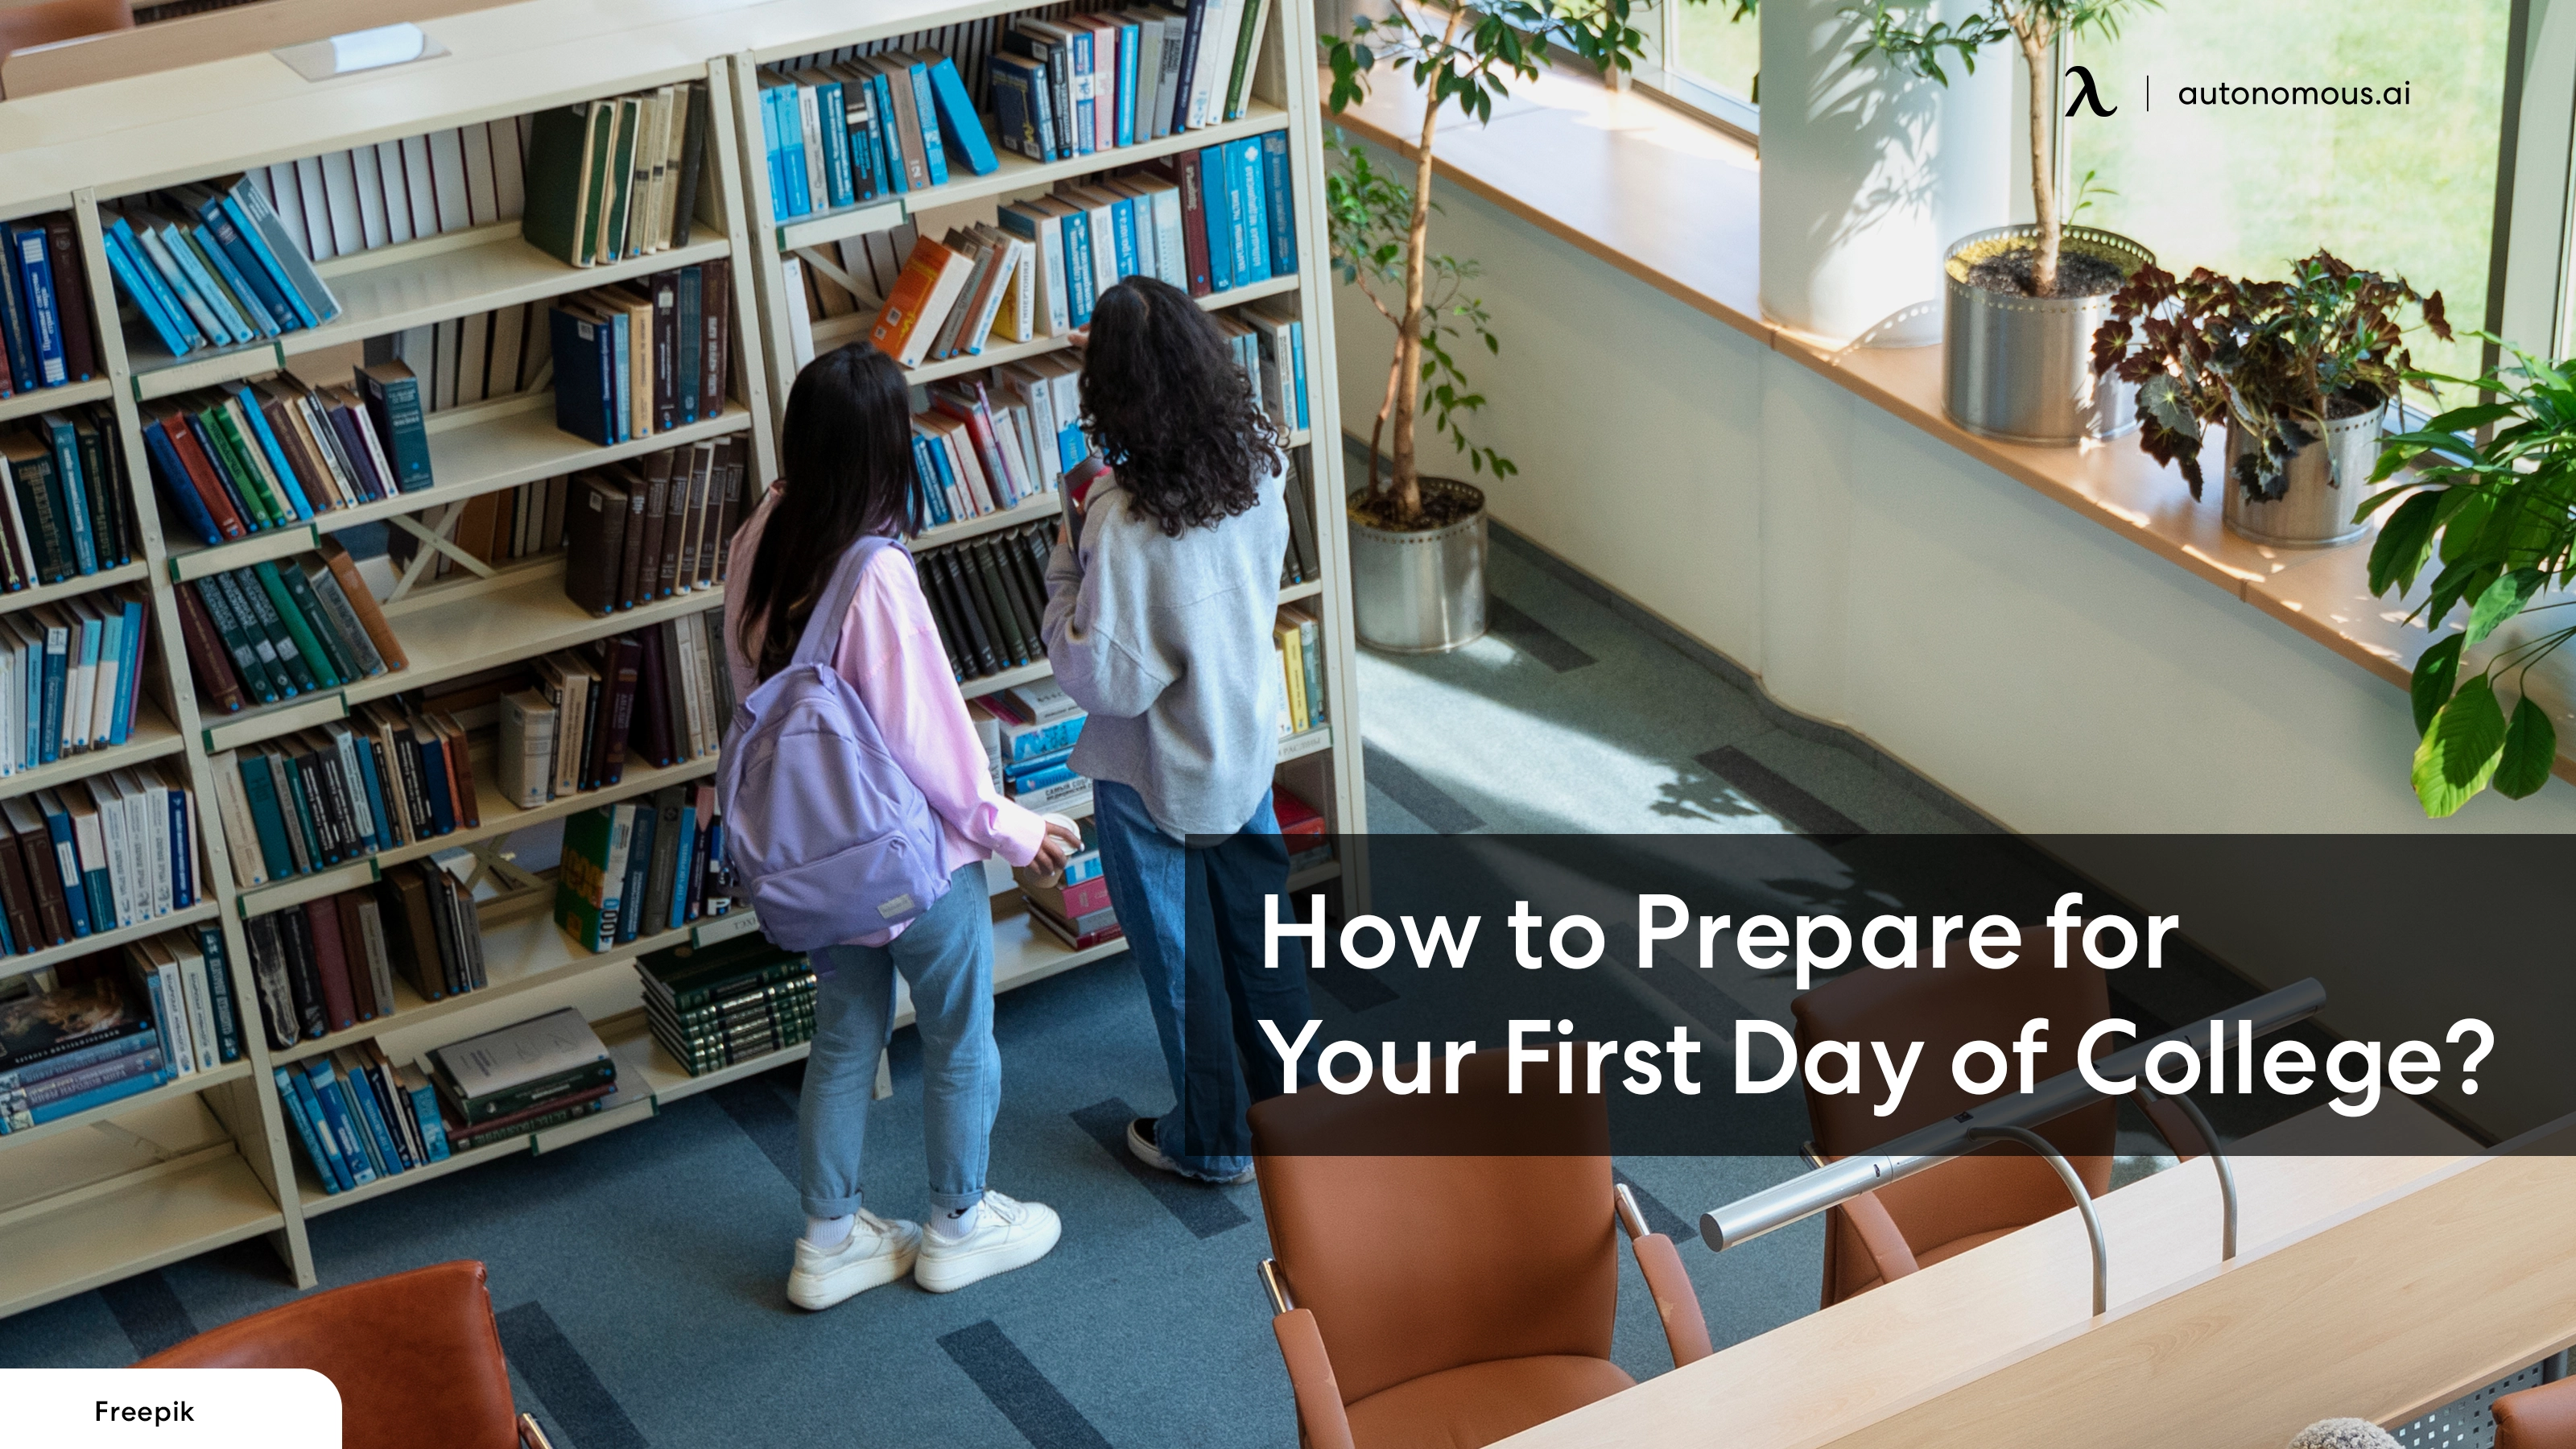 What to Expect and How to Prepare for Your First Day of College?